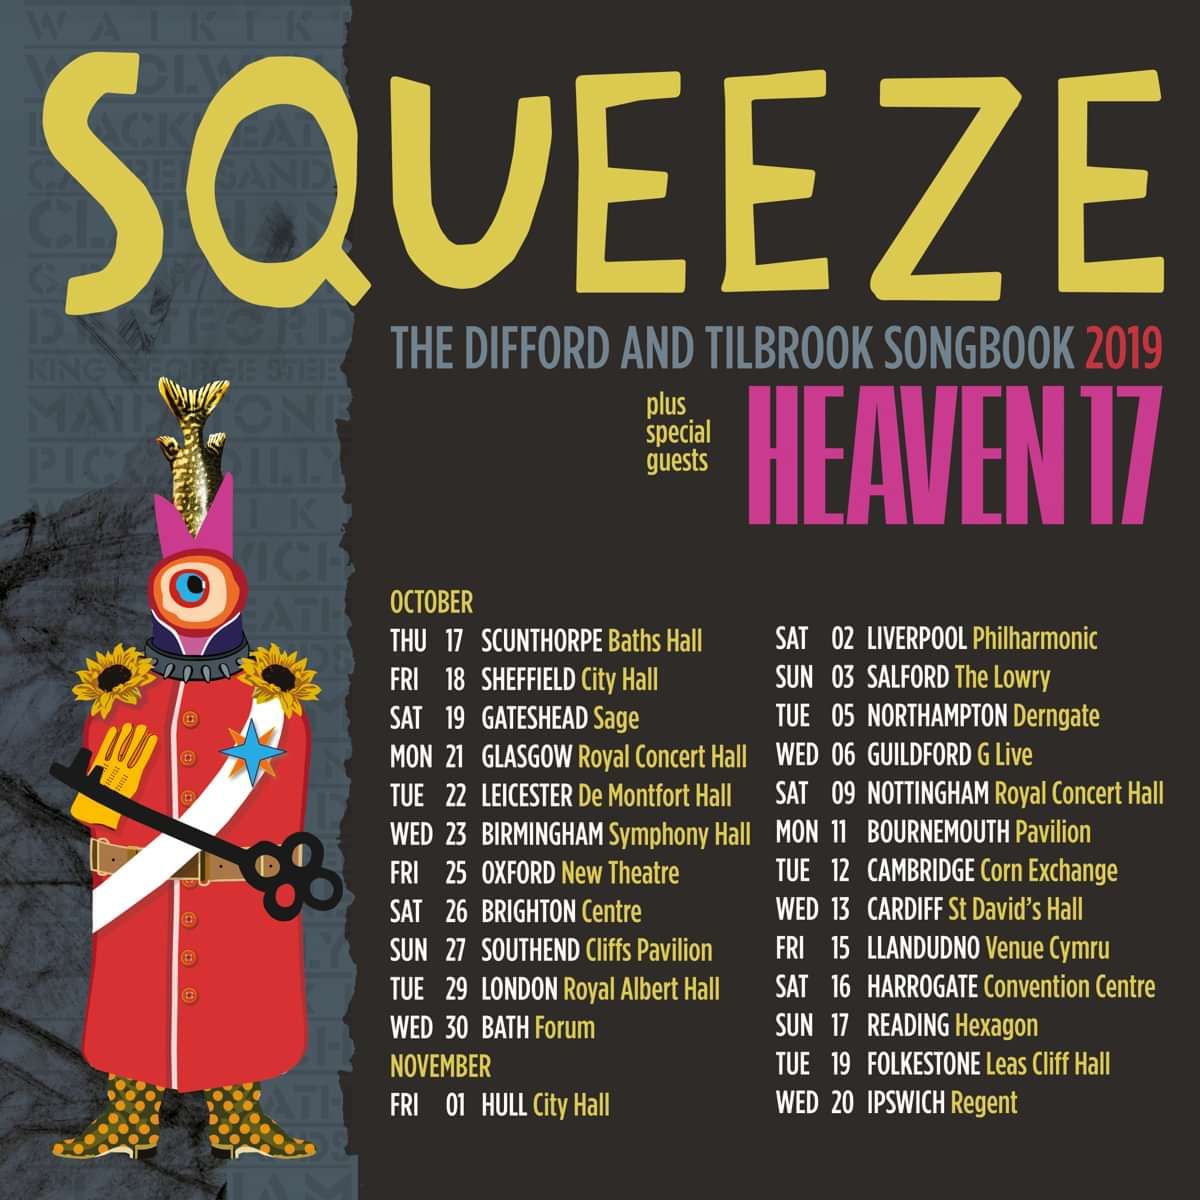 Heaven 17 Special Guests on Squeeze Tour 2019 Heaven 17